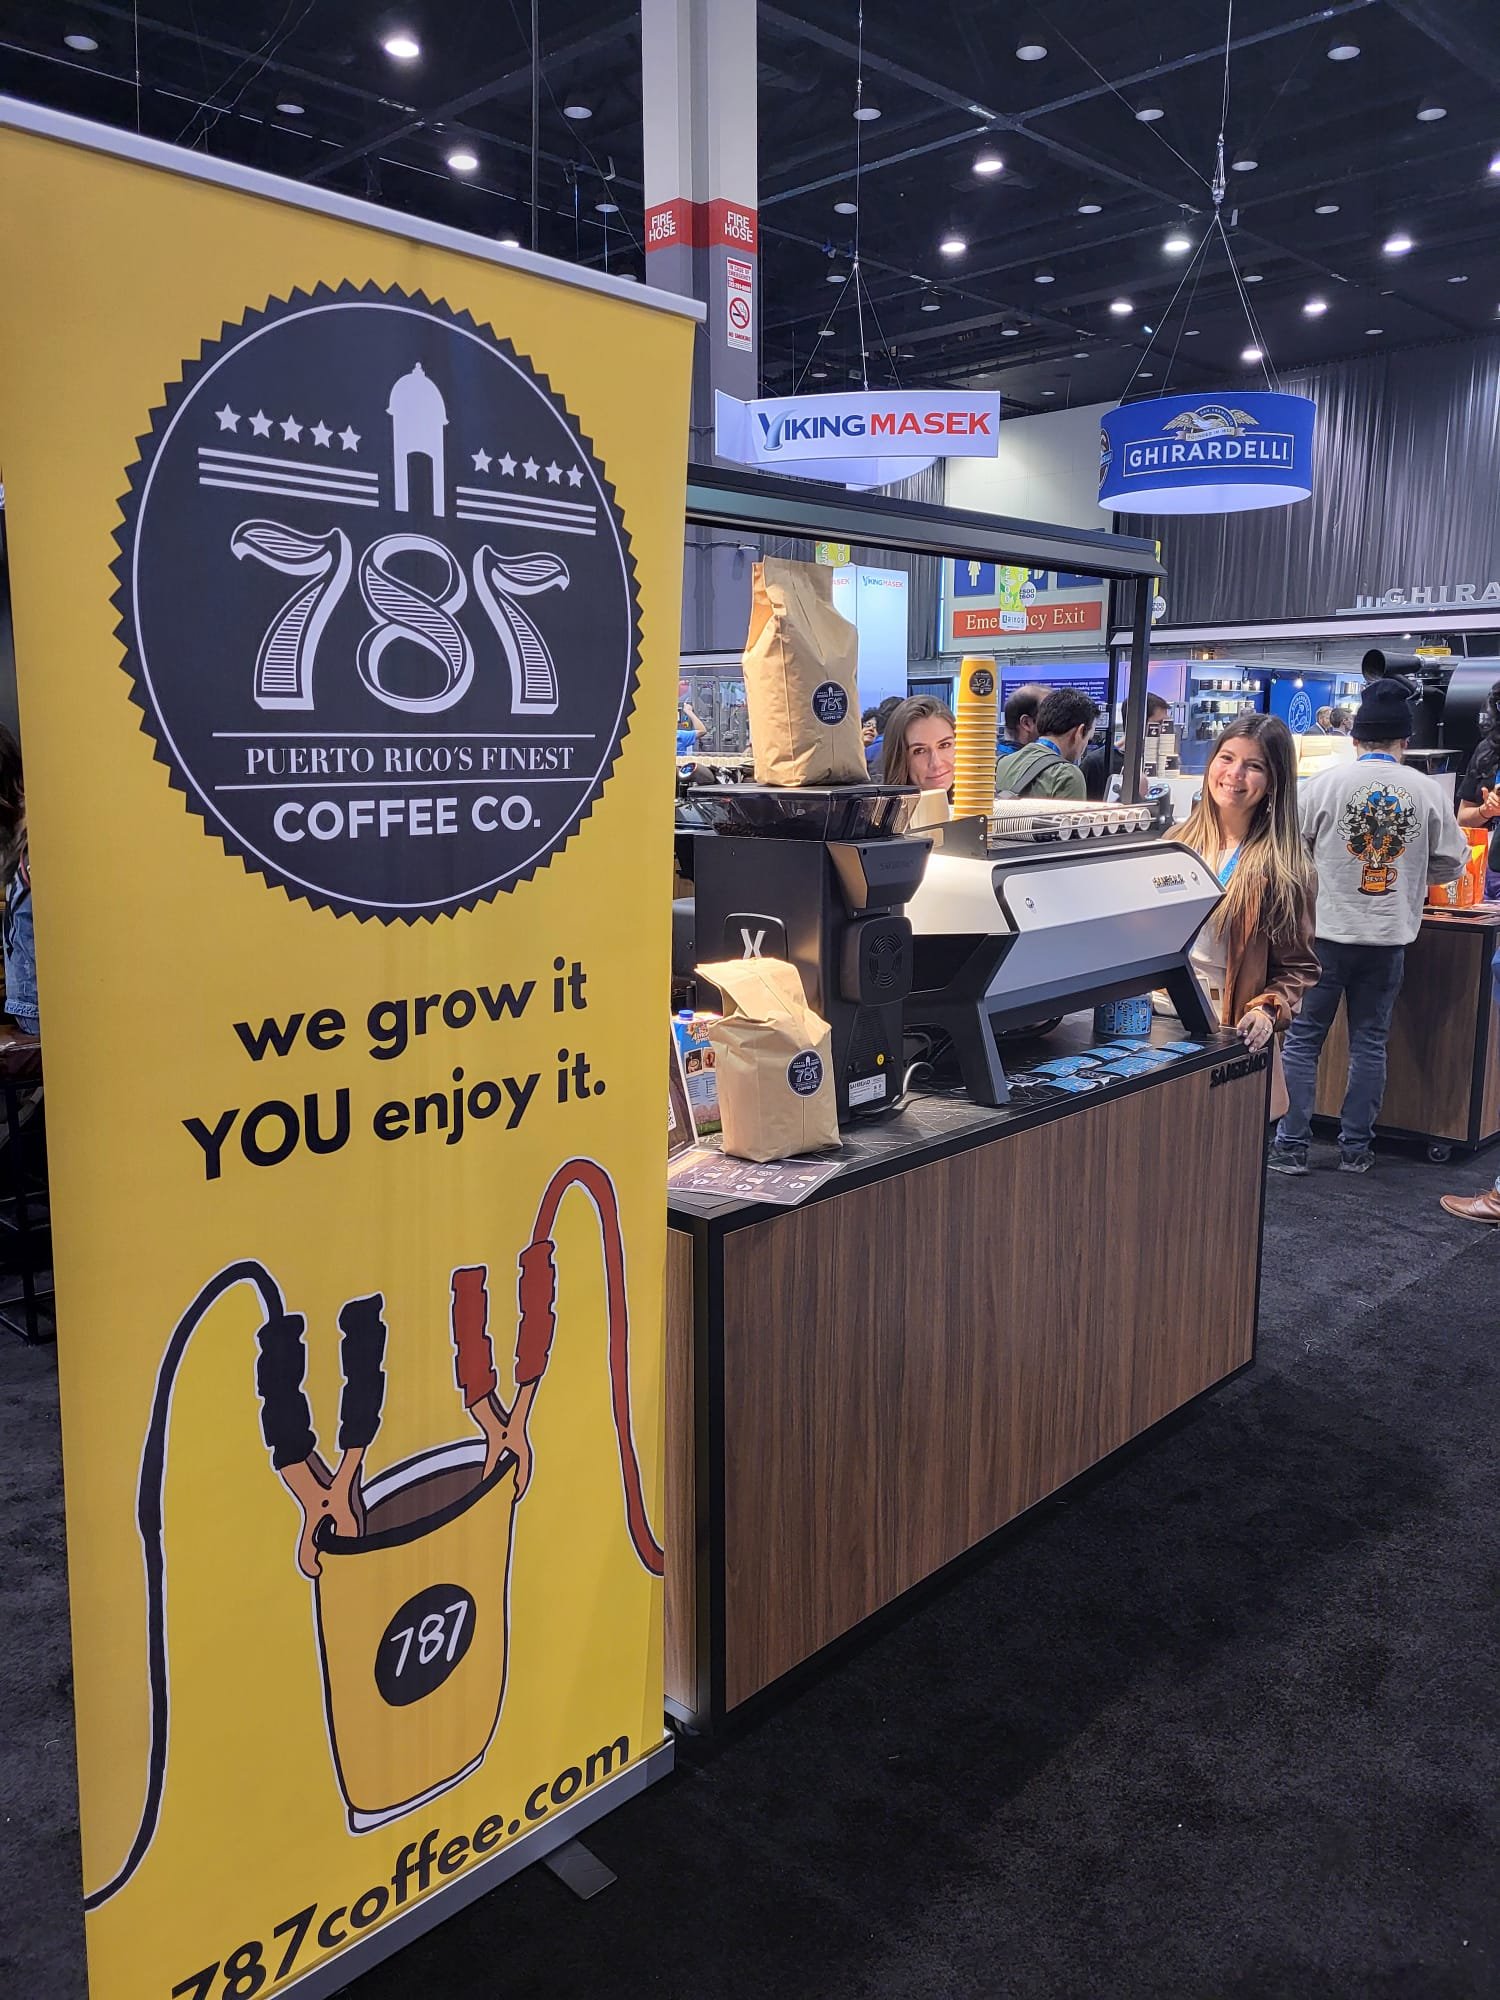 787 coffee in chicago - Copy.jpg